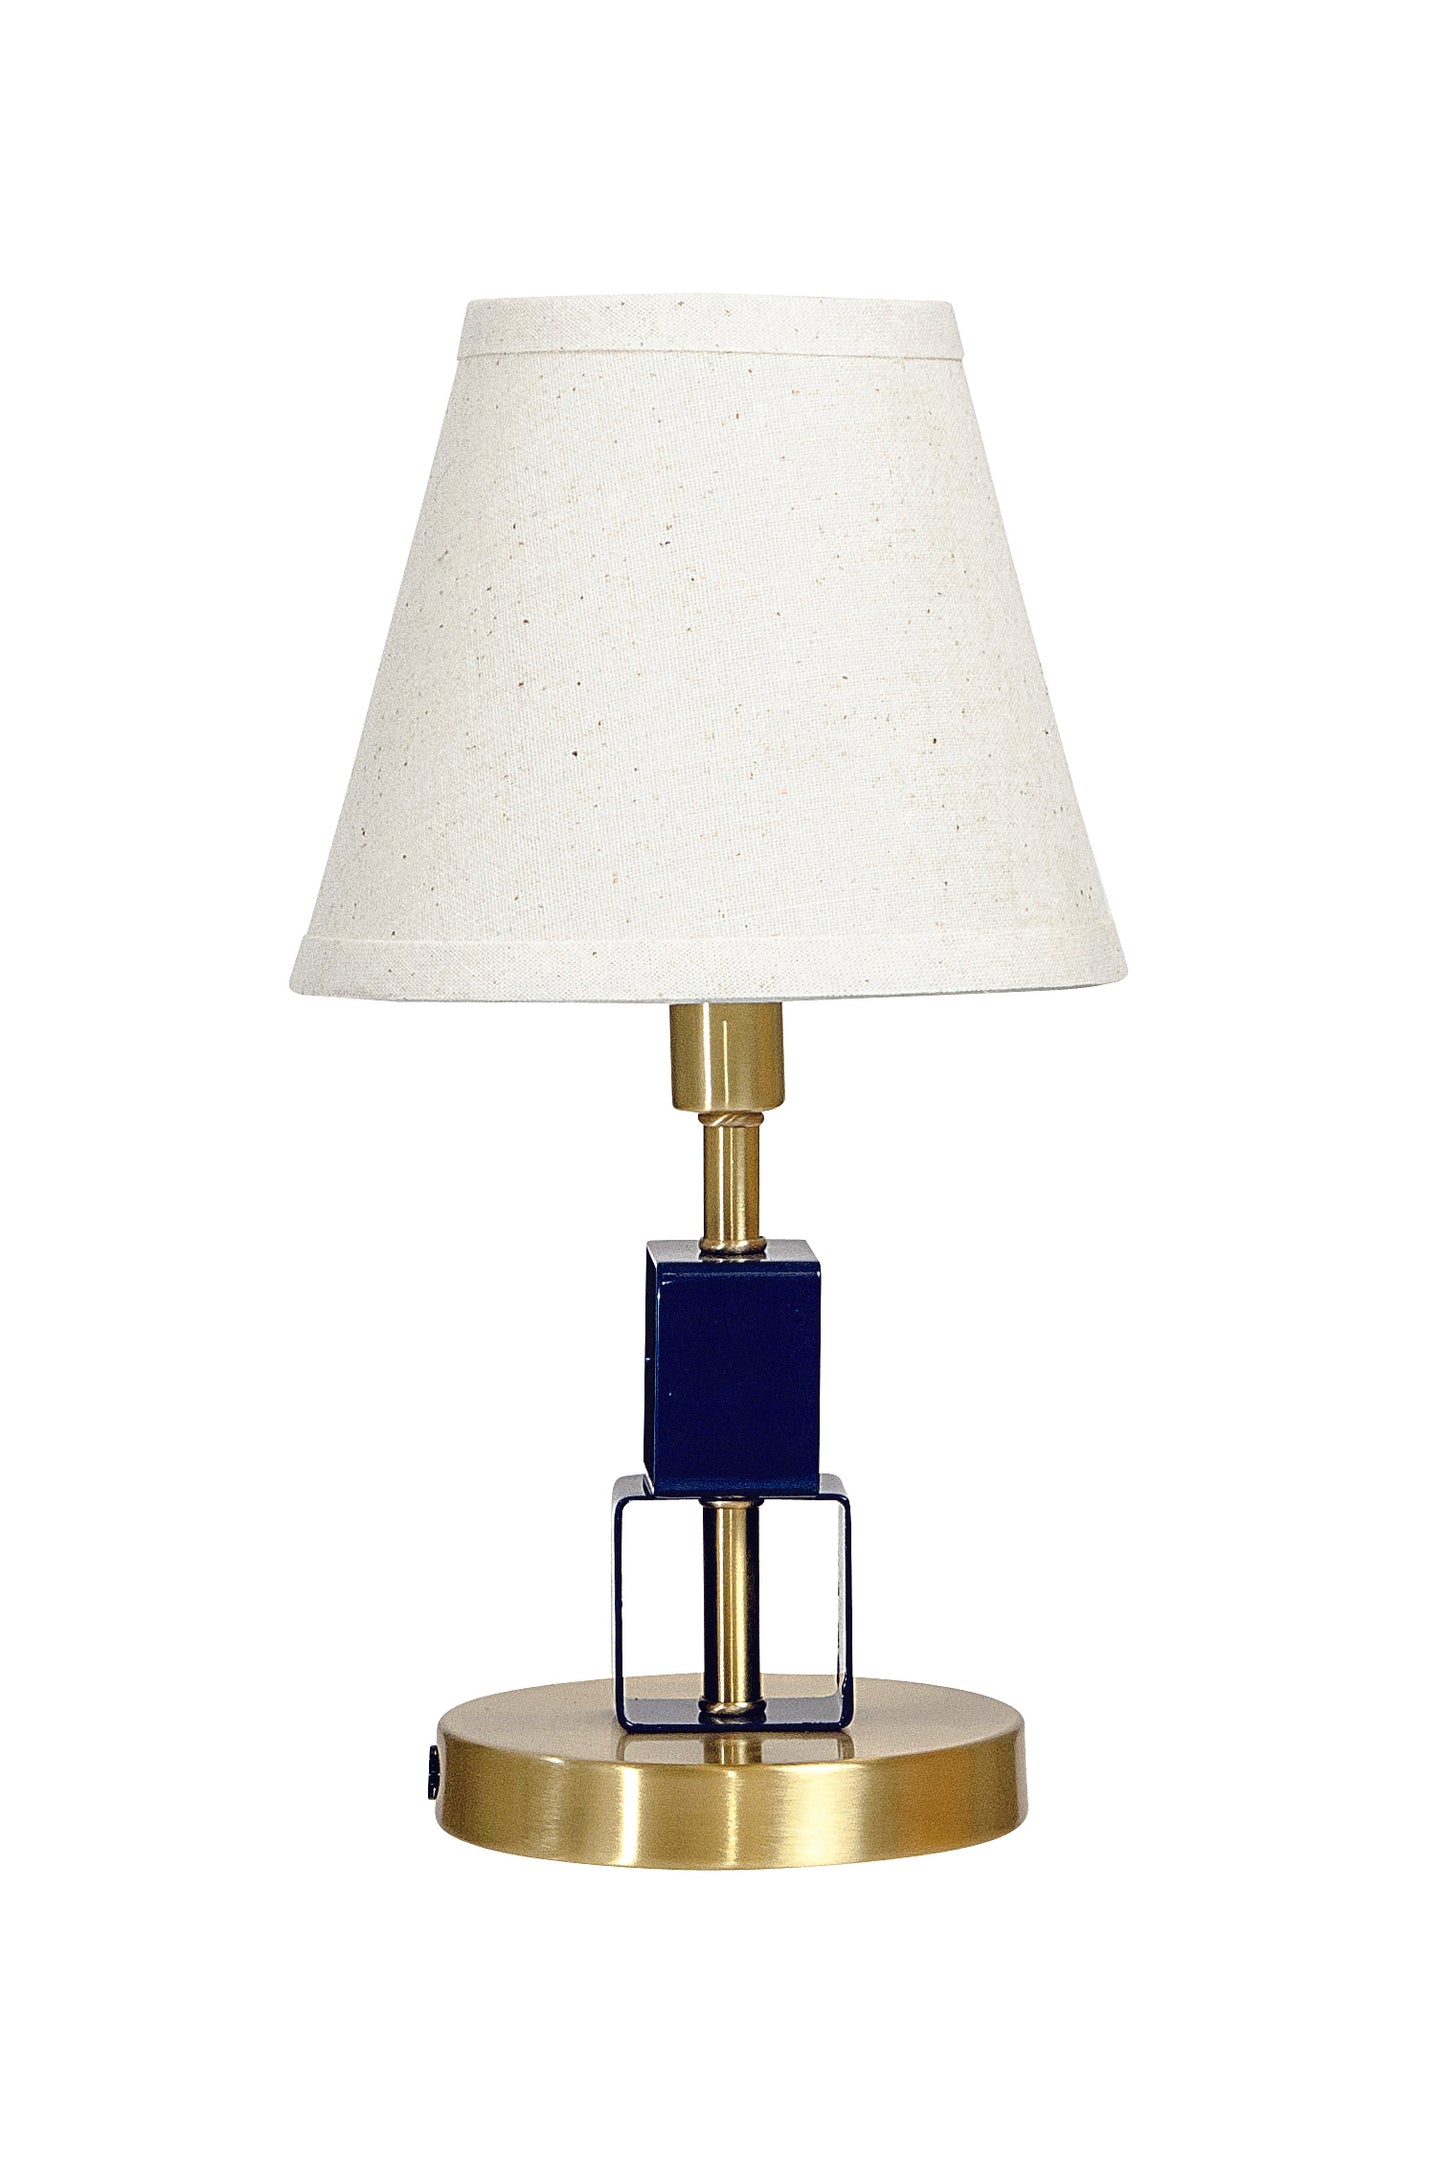 House of Troy Bryson Mini satin brass and navy blue accent lamp B208-SB/NB